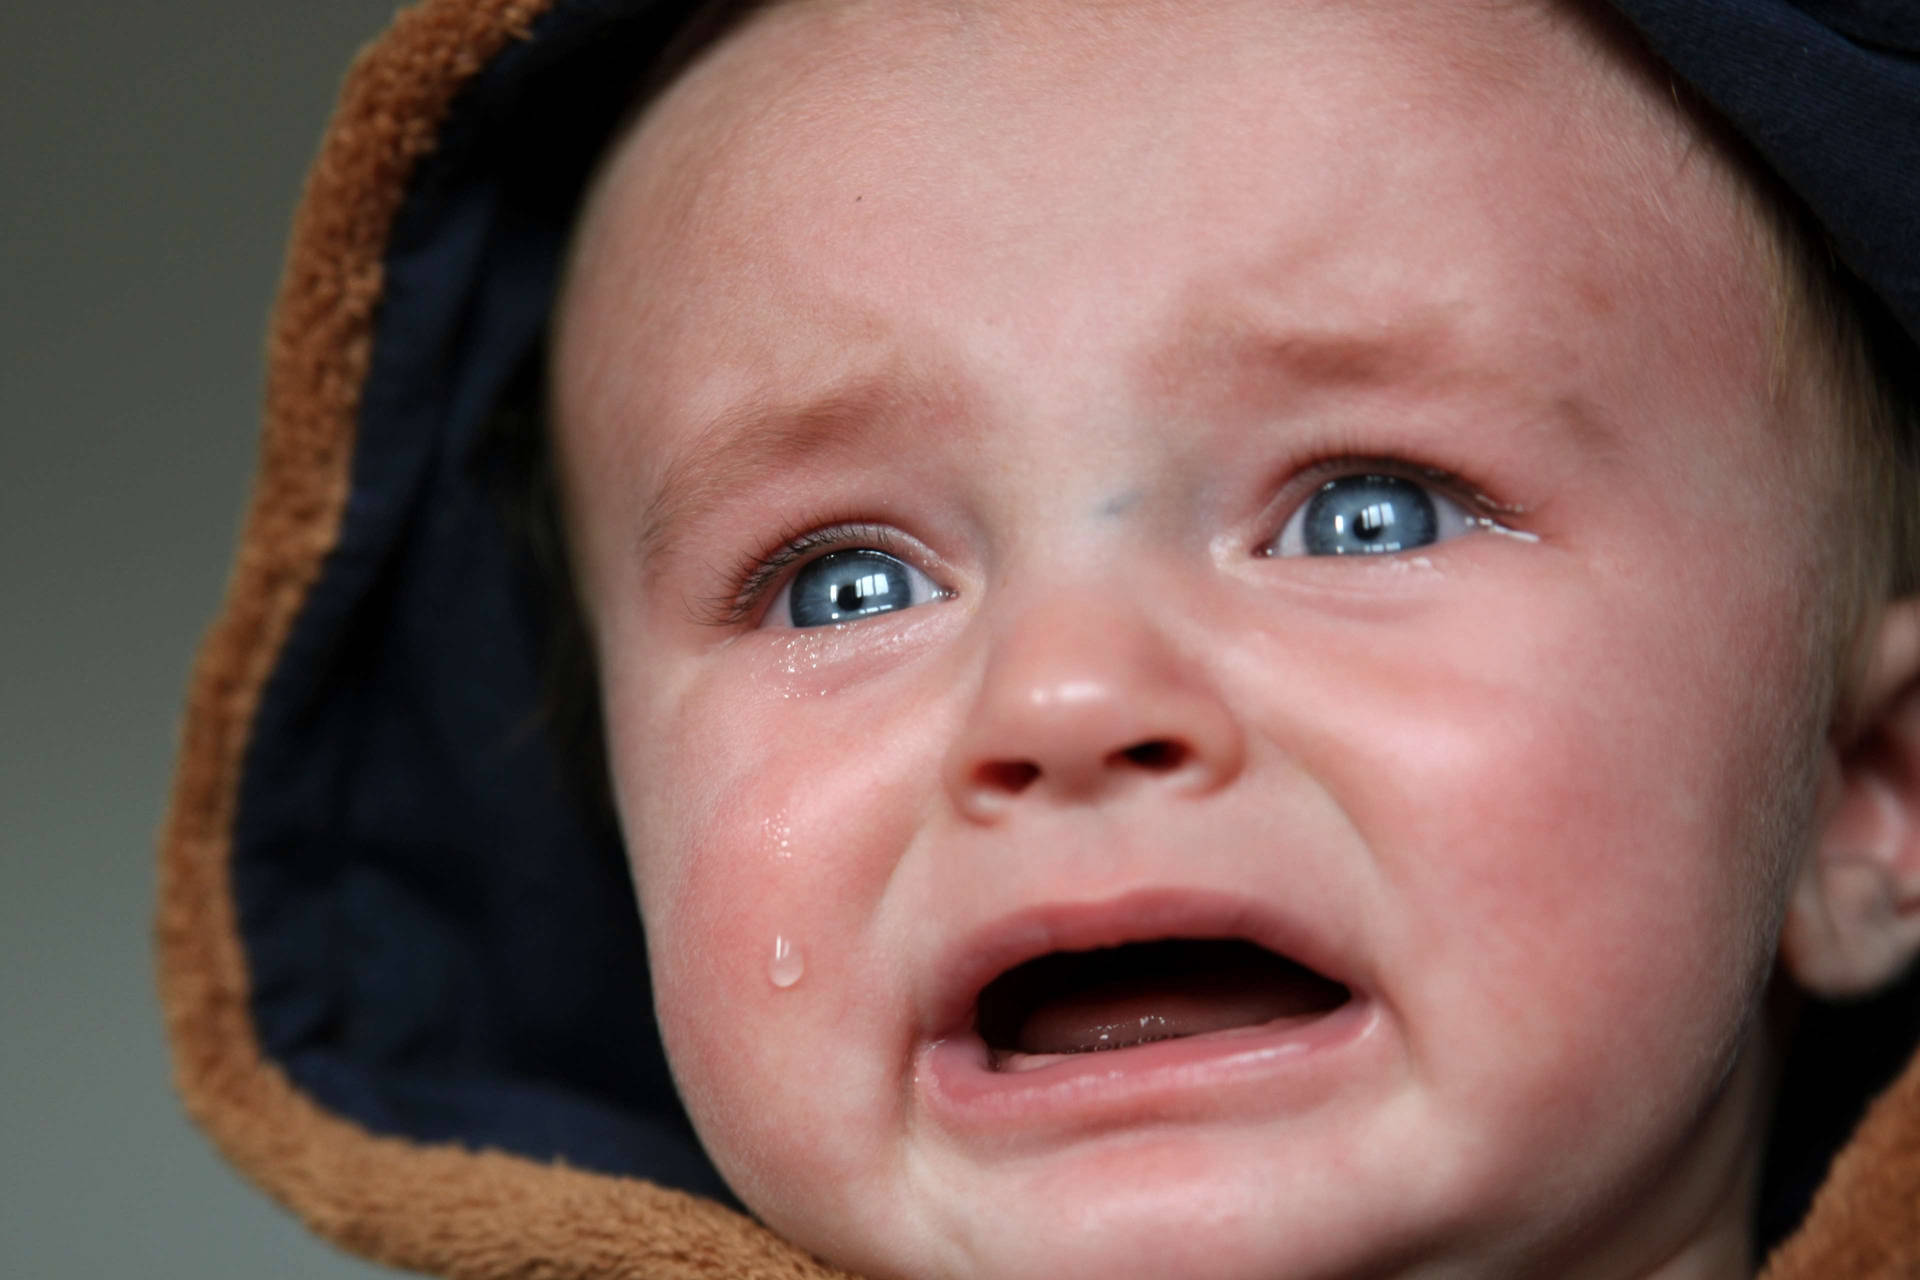 Crying Funny Baby With Blue Eyes Wallpaper